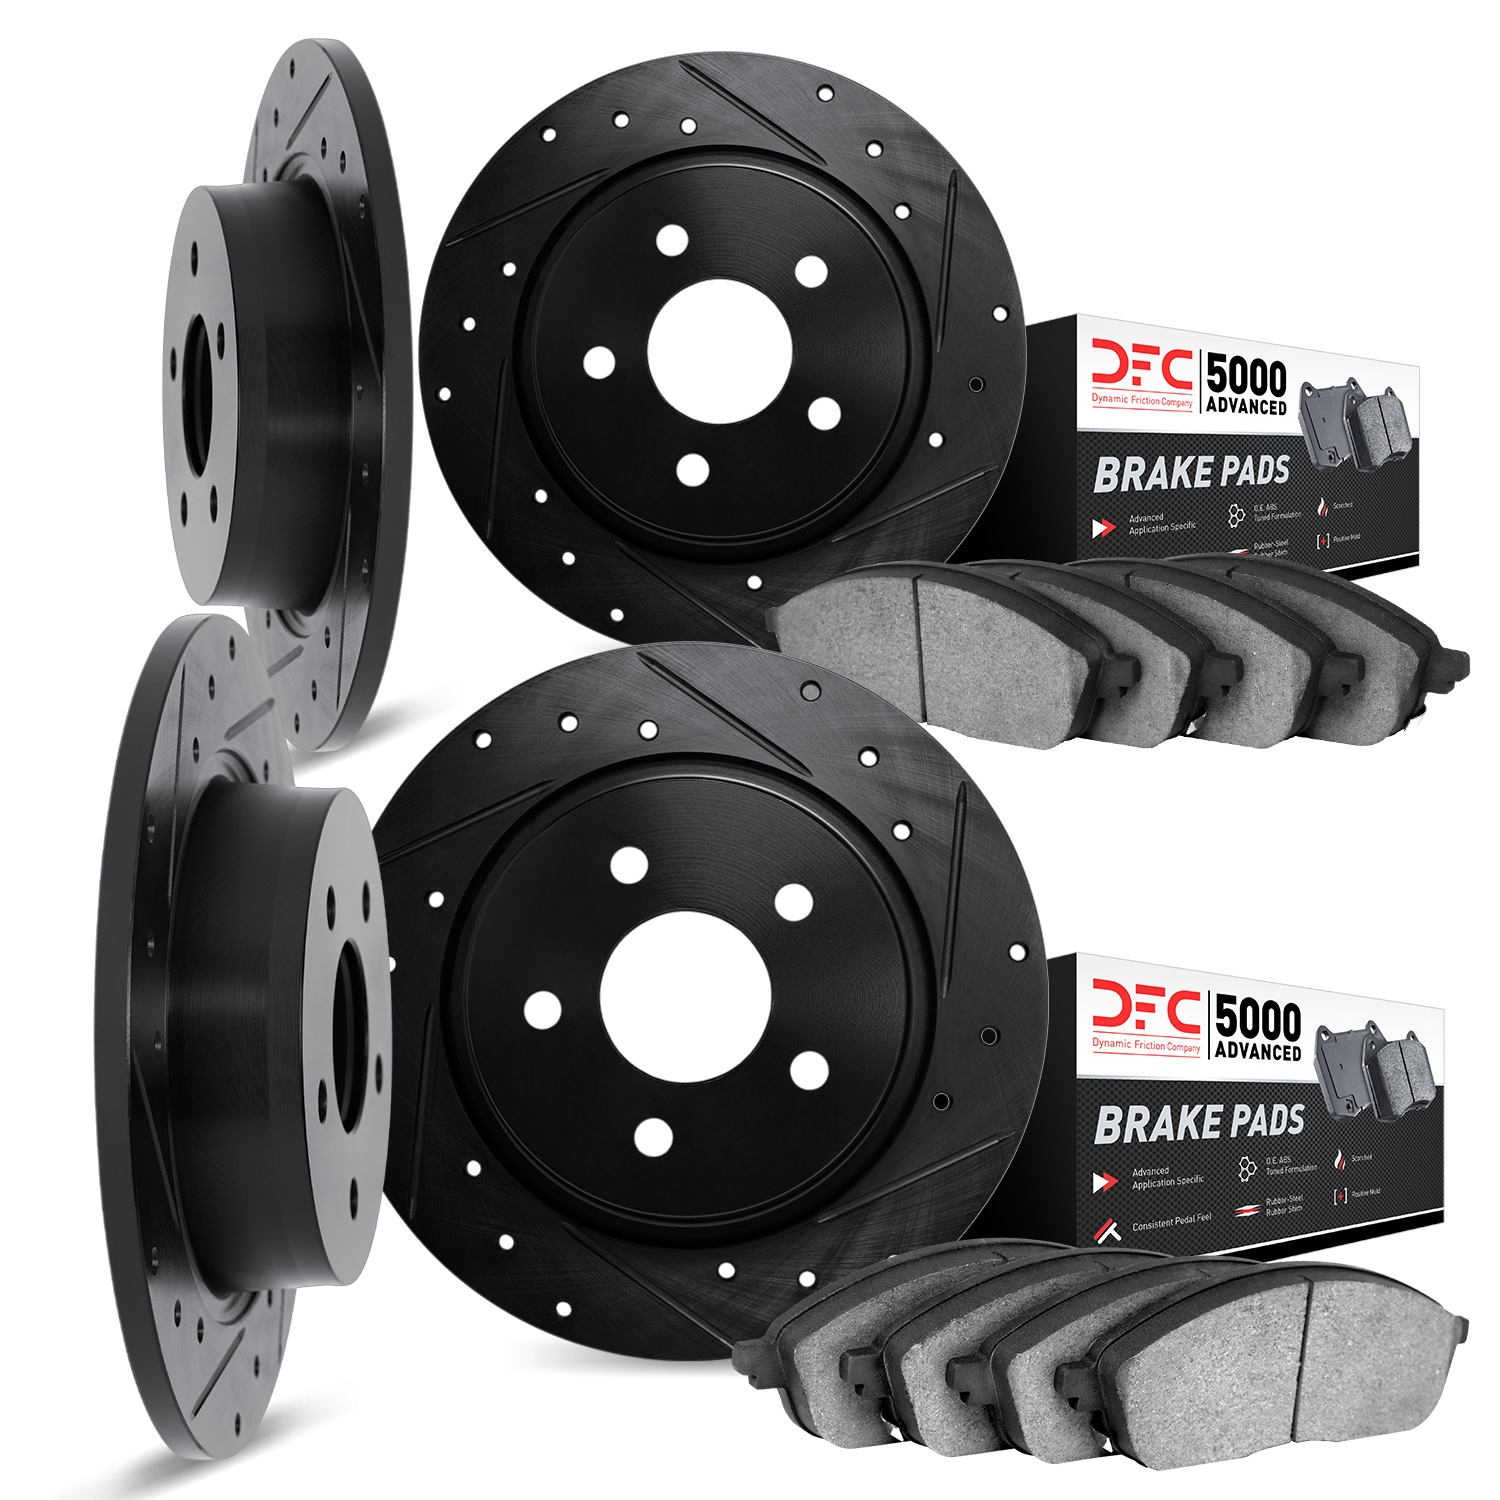 8504-11001 Drilled/Slotted Brake Rotors w/5000 Advanced Brake Pads Kit [Black], 1994-1999 Land Rover, Position: Front and Rear